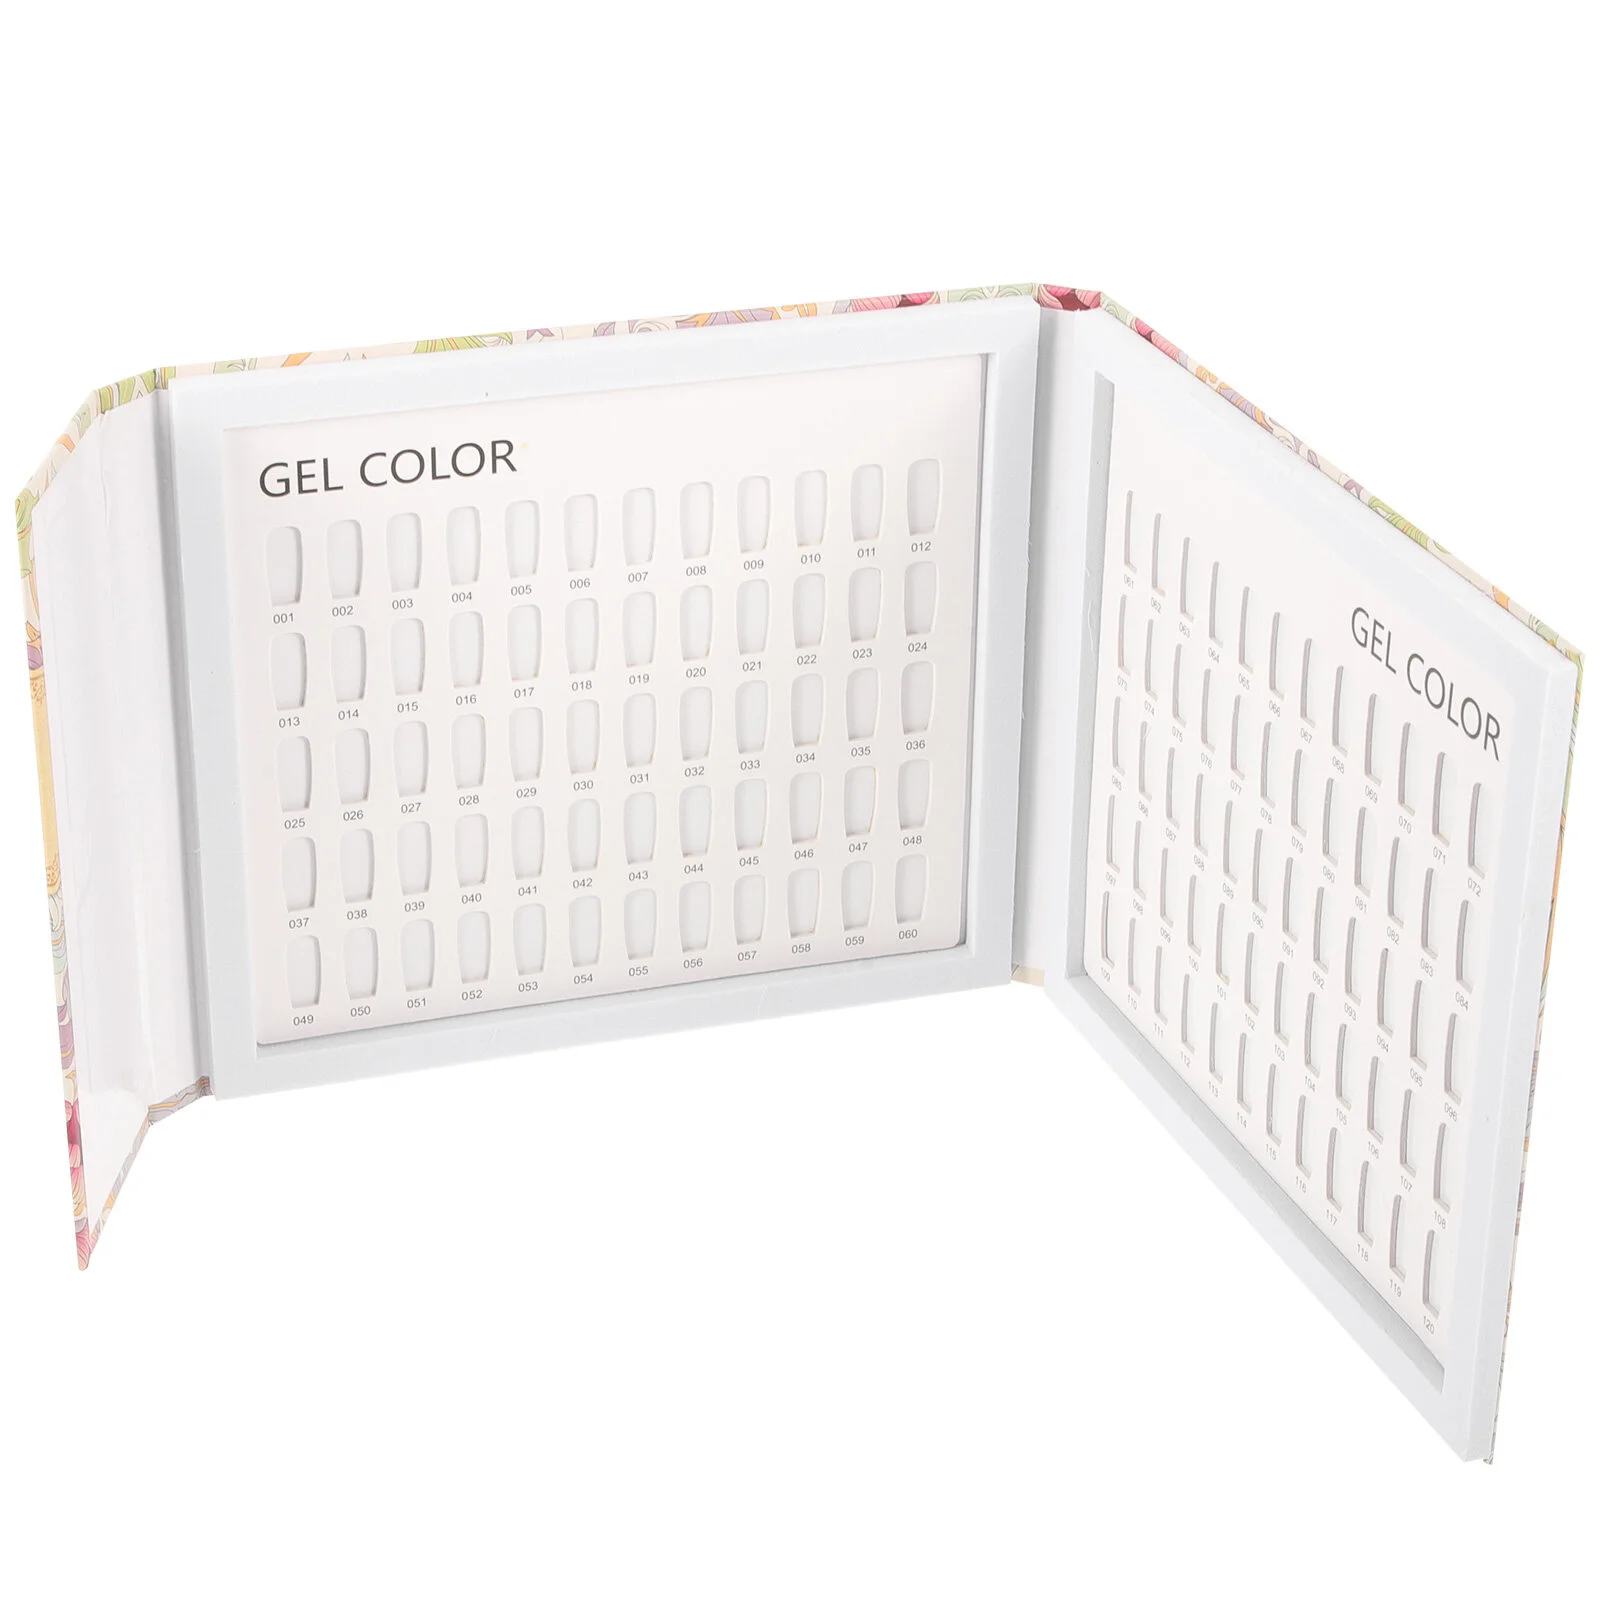 

Nail Kit Set Color Book Gel Sample Tool 160-color Plate The Polish Card Show Manicure Board